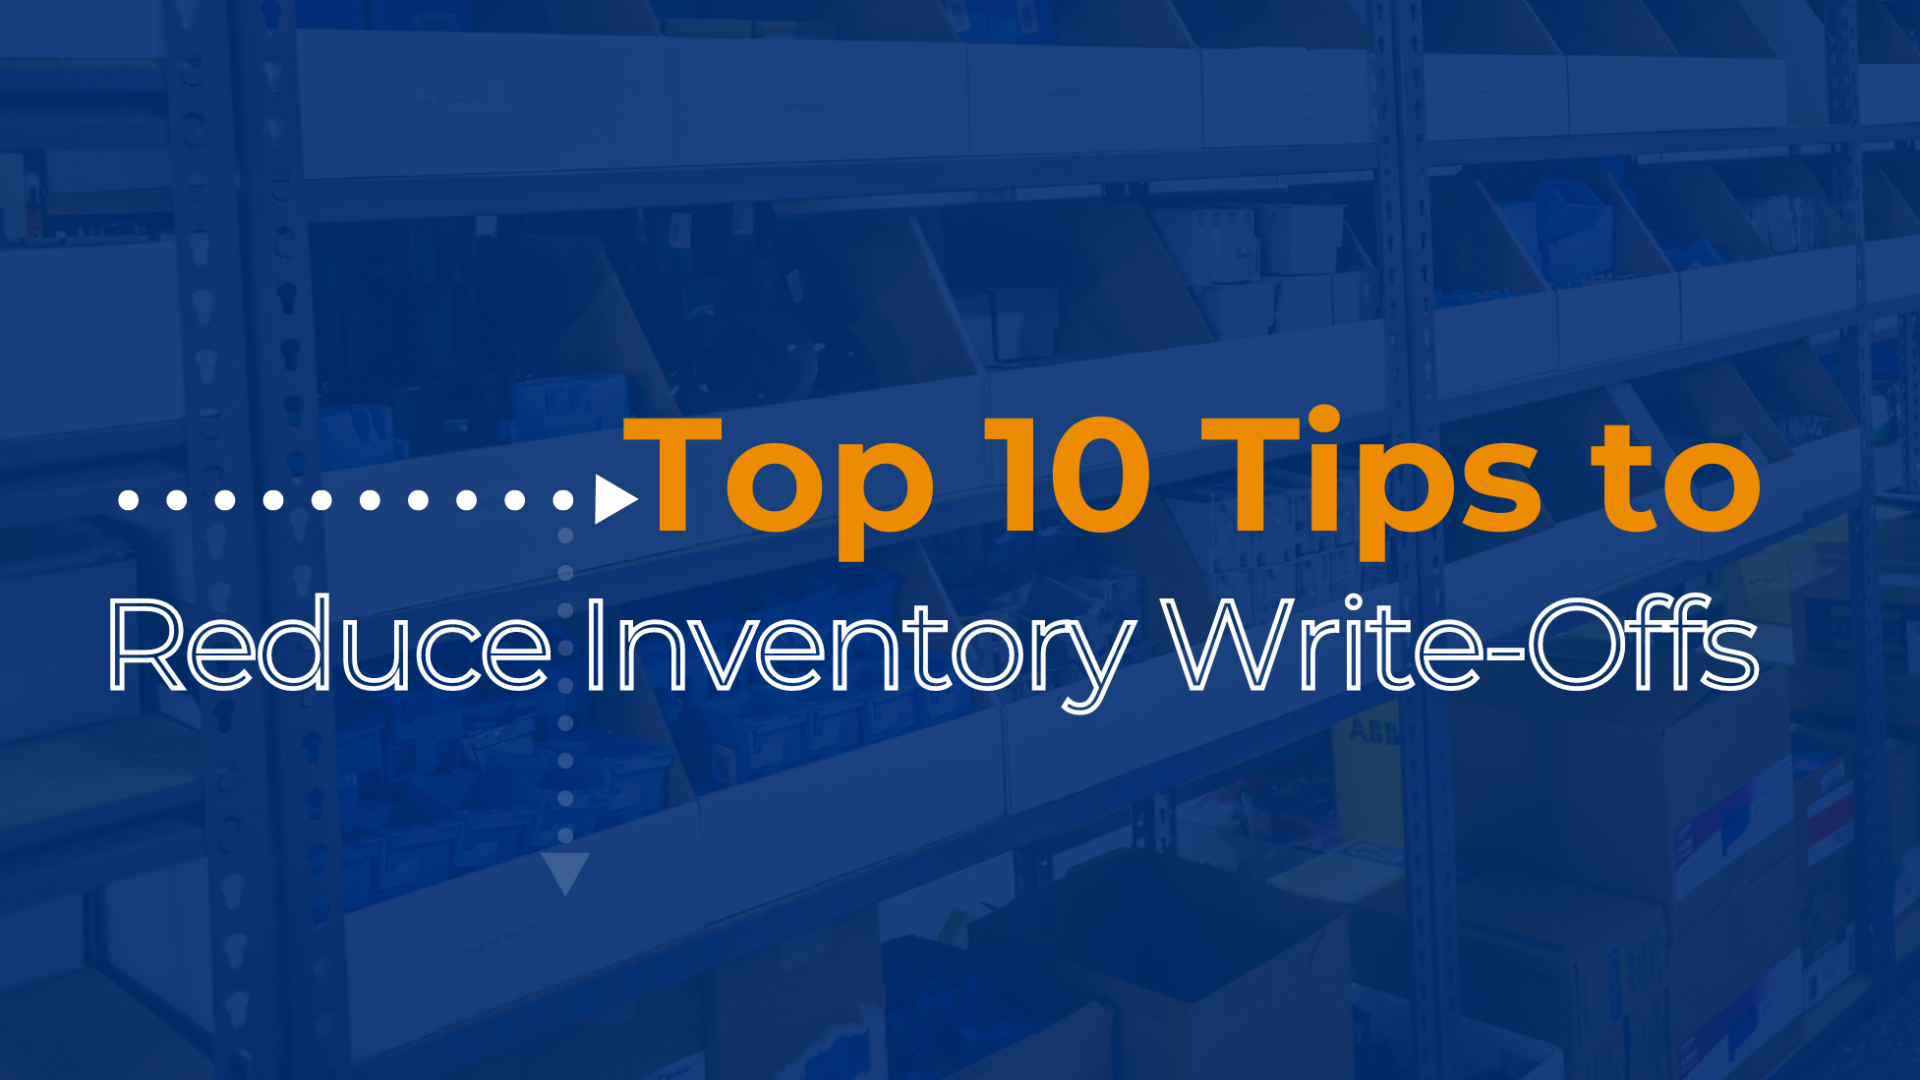 Top 10 Tips to Reduce Inventory Write-Offs